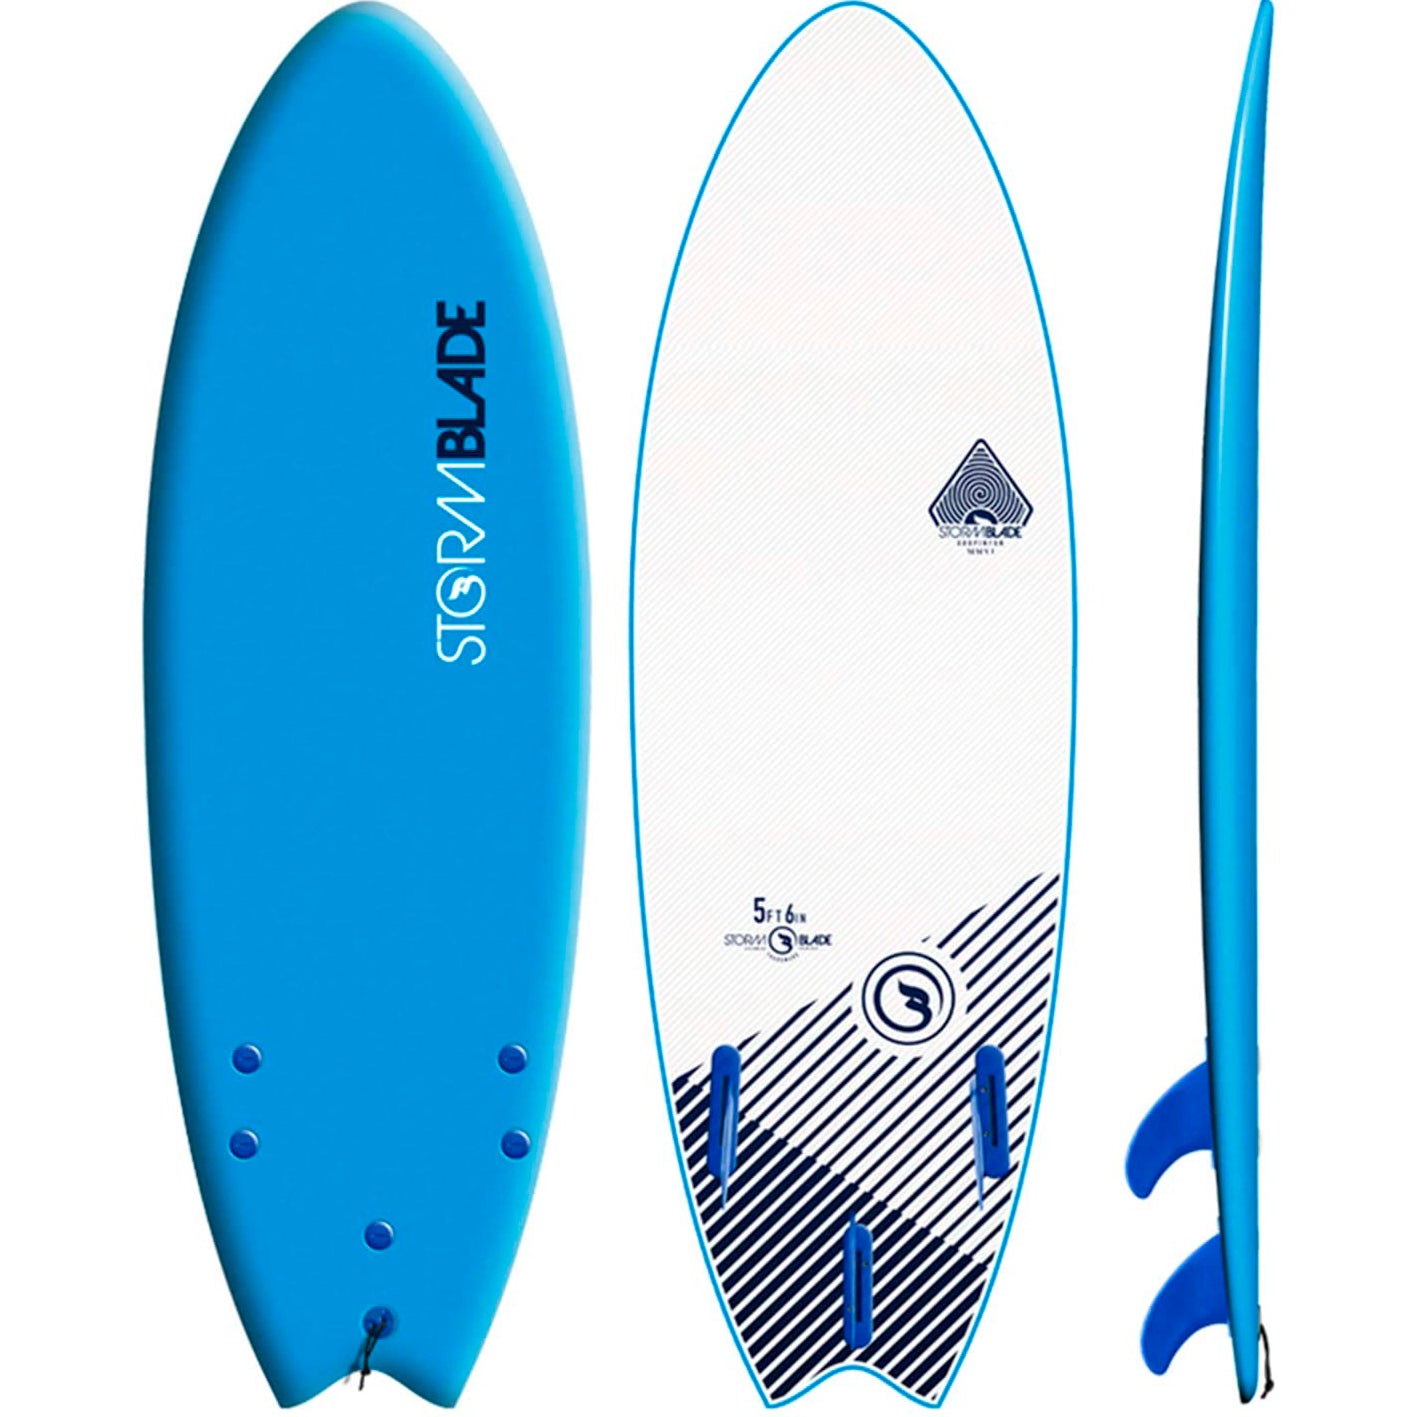 Storm Blade Swallow Tail Surfboard Azure Blue 5ft6in